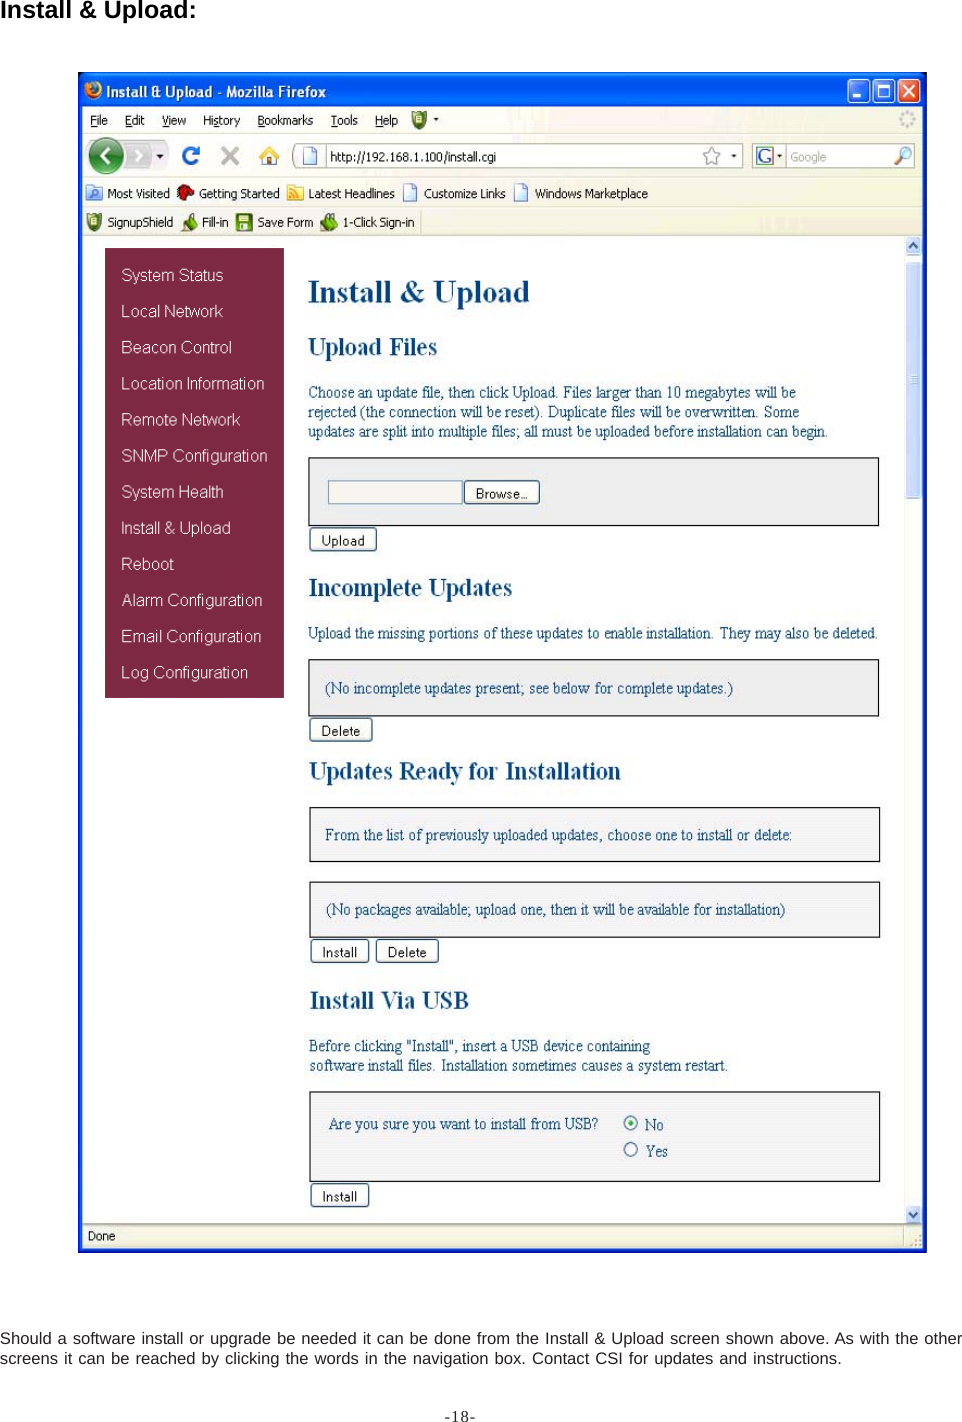 -18-Should a software install or upgrade be needed it can be done from the Install &amp; Upload screen shown above. As with the otherscreens it can be reached by clicking the words in the navigation box. Contact CSI for updates and instructions.Install &amp; Upload: